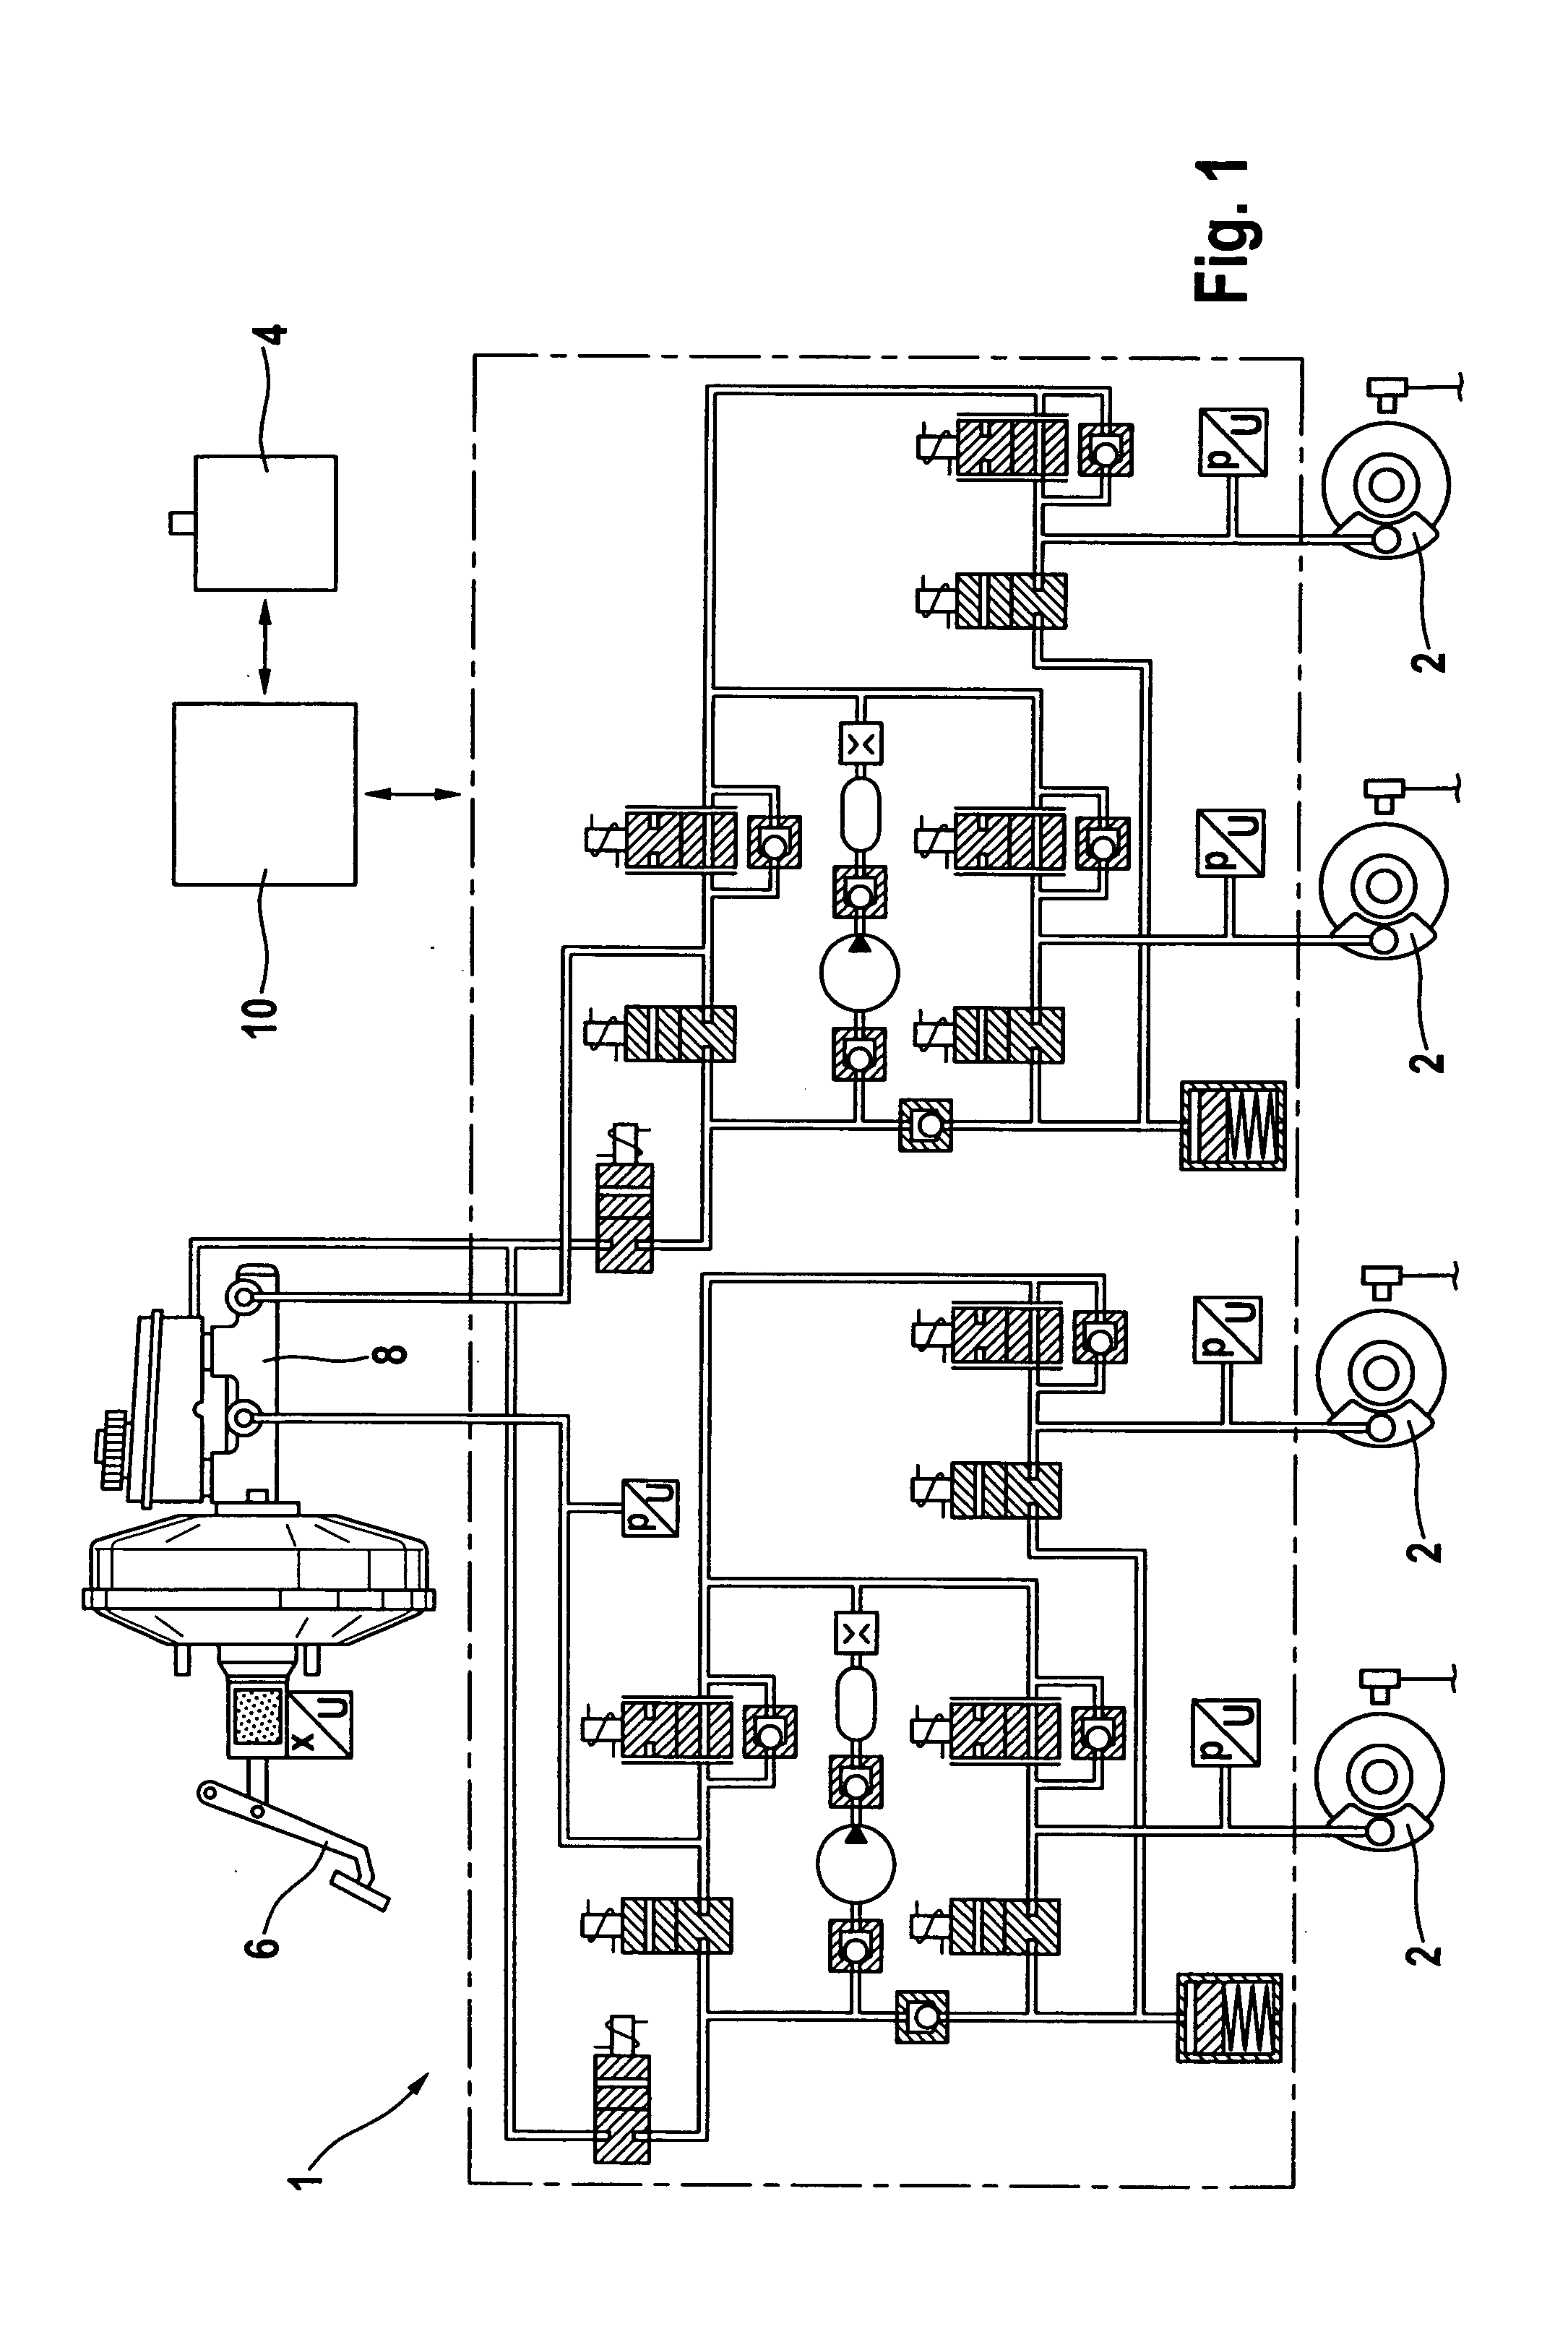 Method for Controlling a Brake System of a Motor Vehicle with All-Wheel Drive